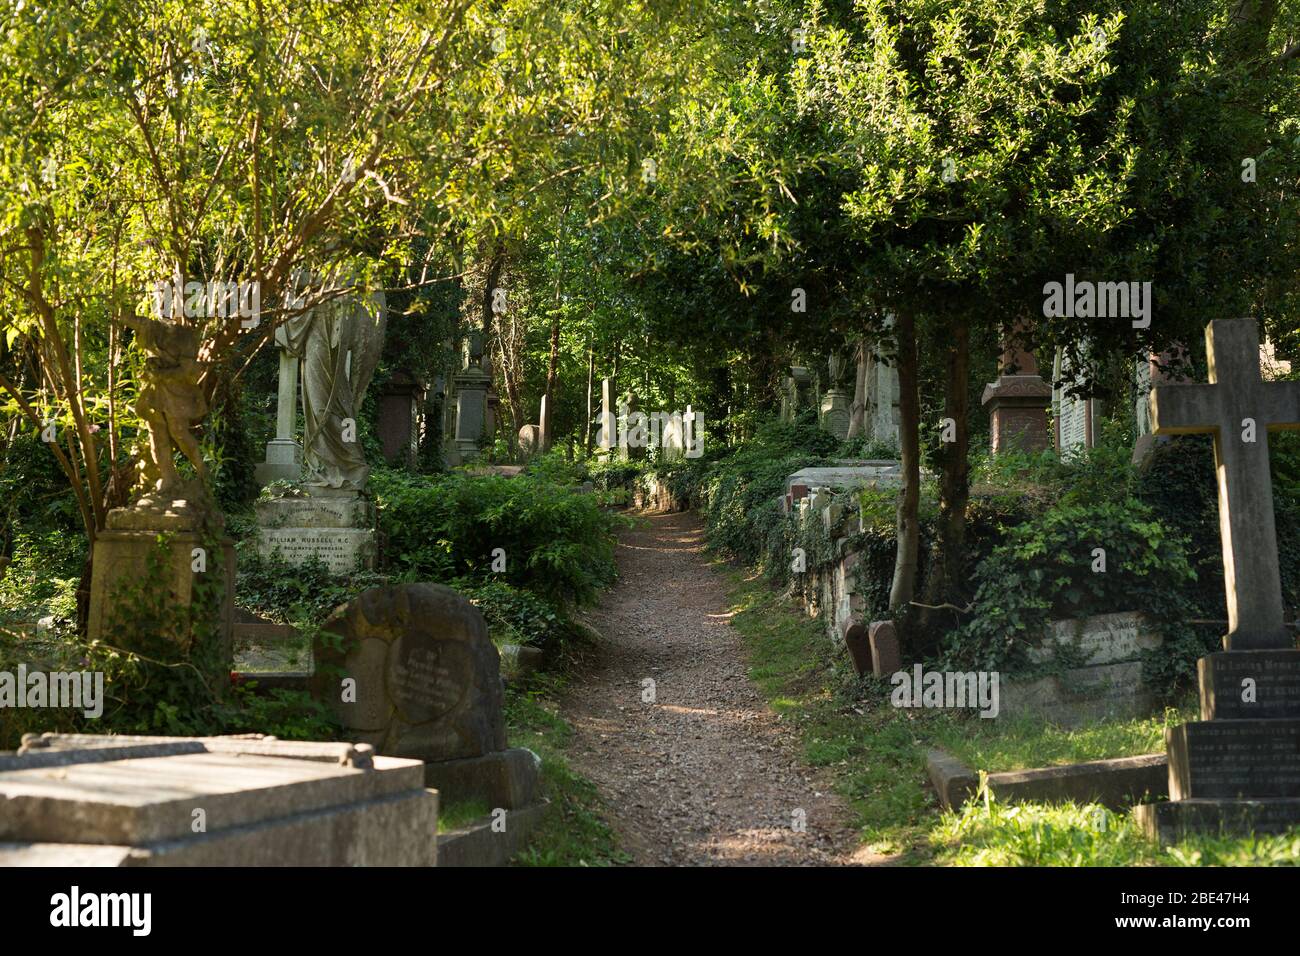 Sunlight filters through the trees over a walking path at Highgate Cemetery, London, England, United Kingdom. Stock Photo